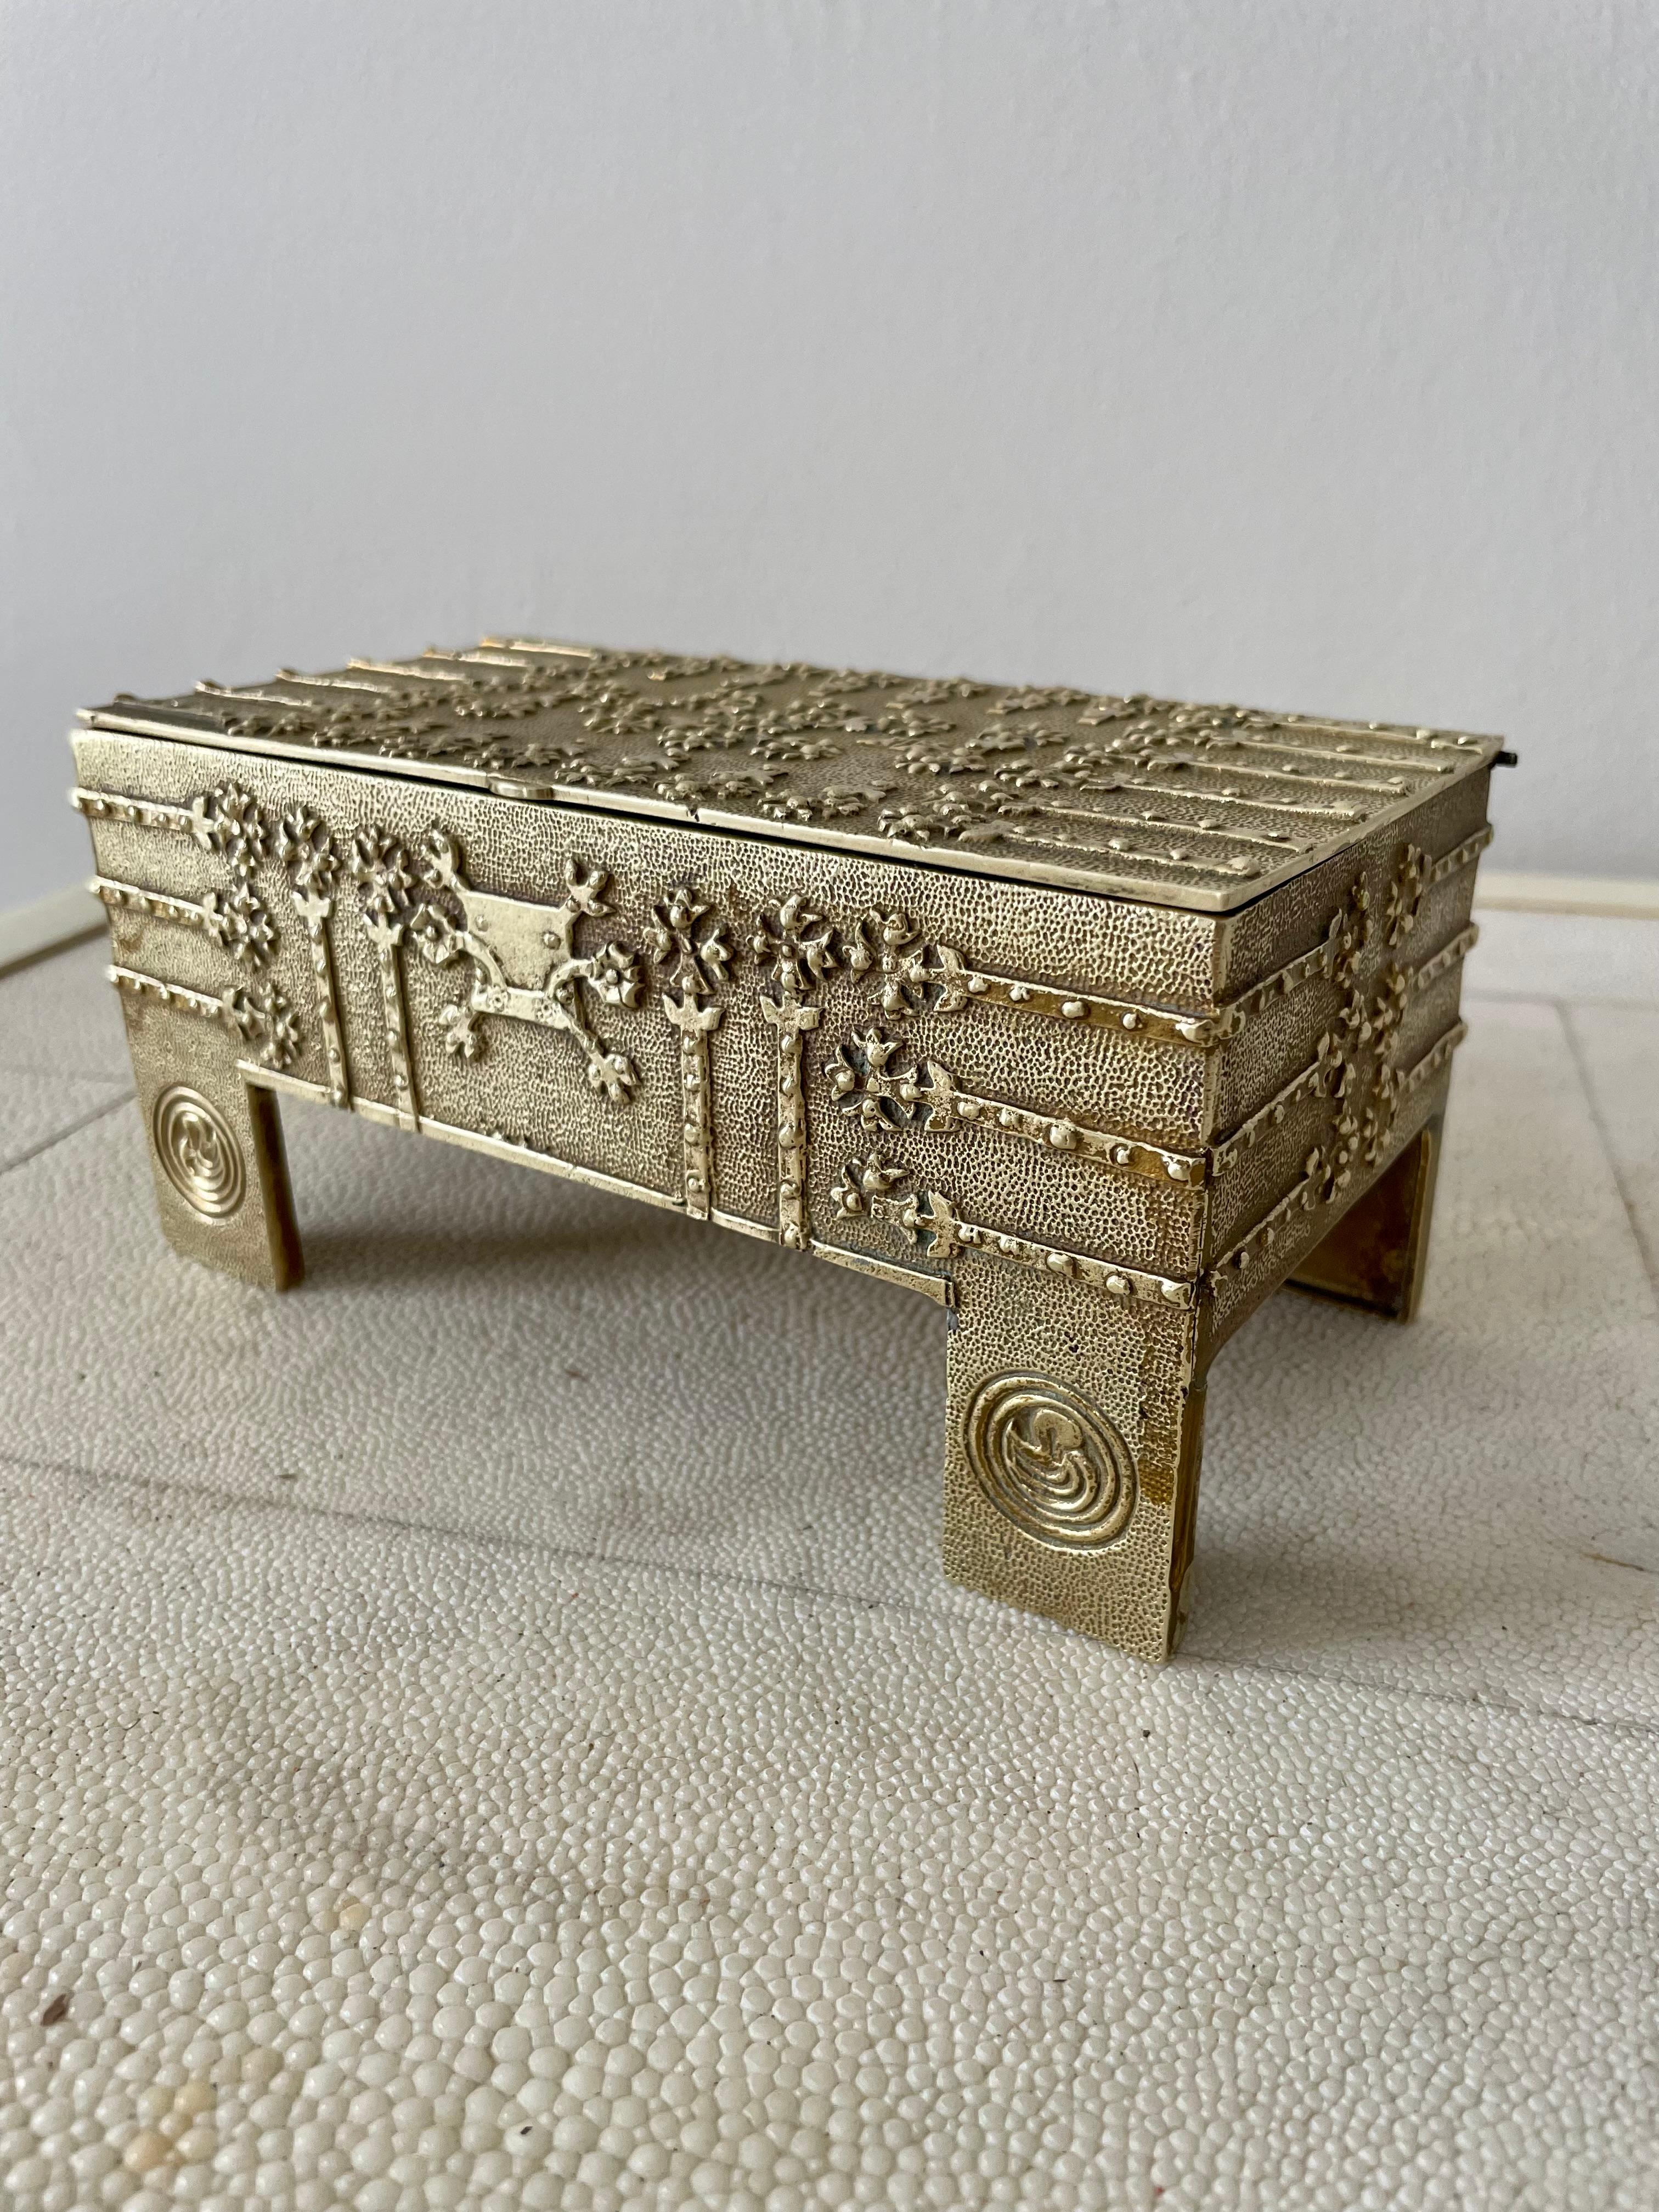 Brutalist Hammered Brass Box or Jewelry Casket In Good Condition For Sale In Los Angeles, CA